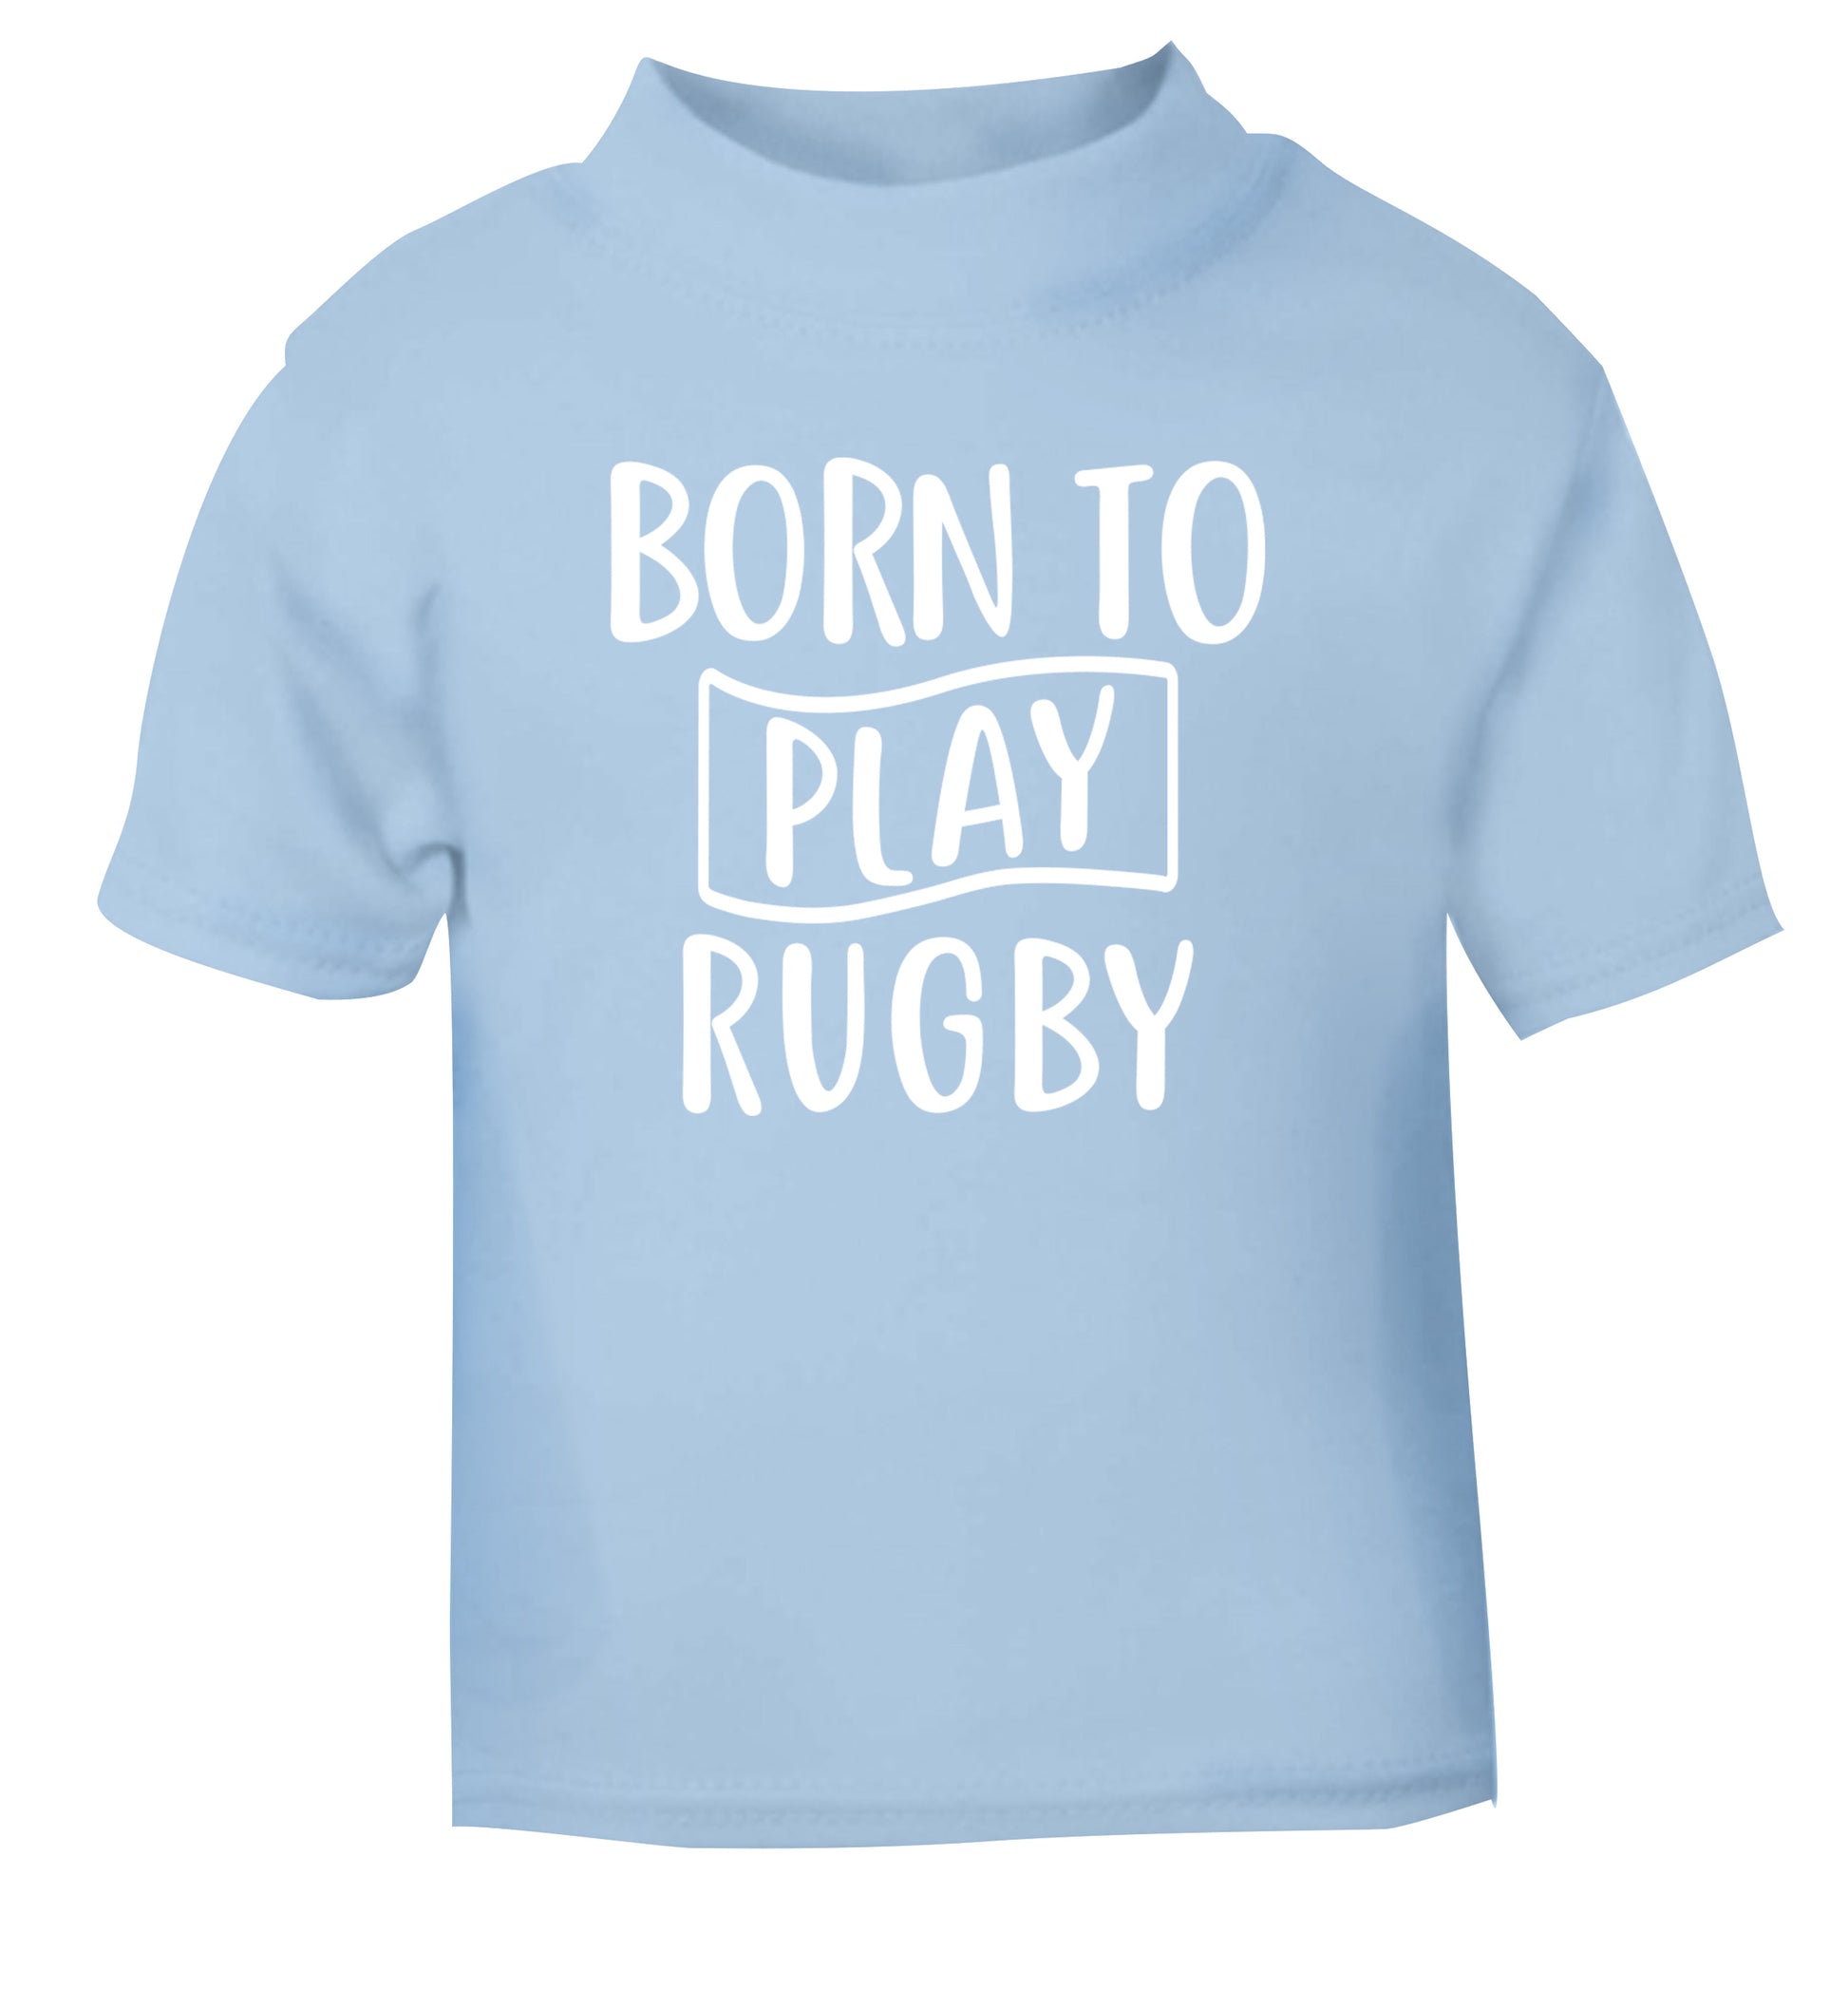 Born to play rugby light blue Baby Toddler Tshirt 2 Years